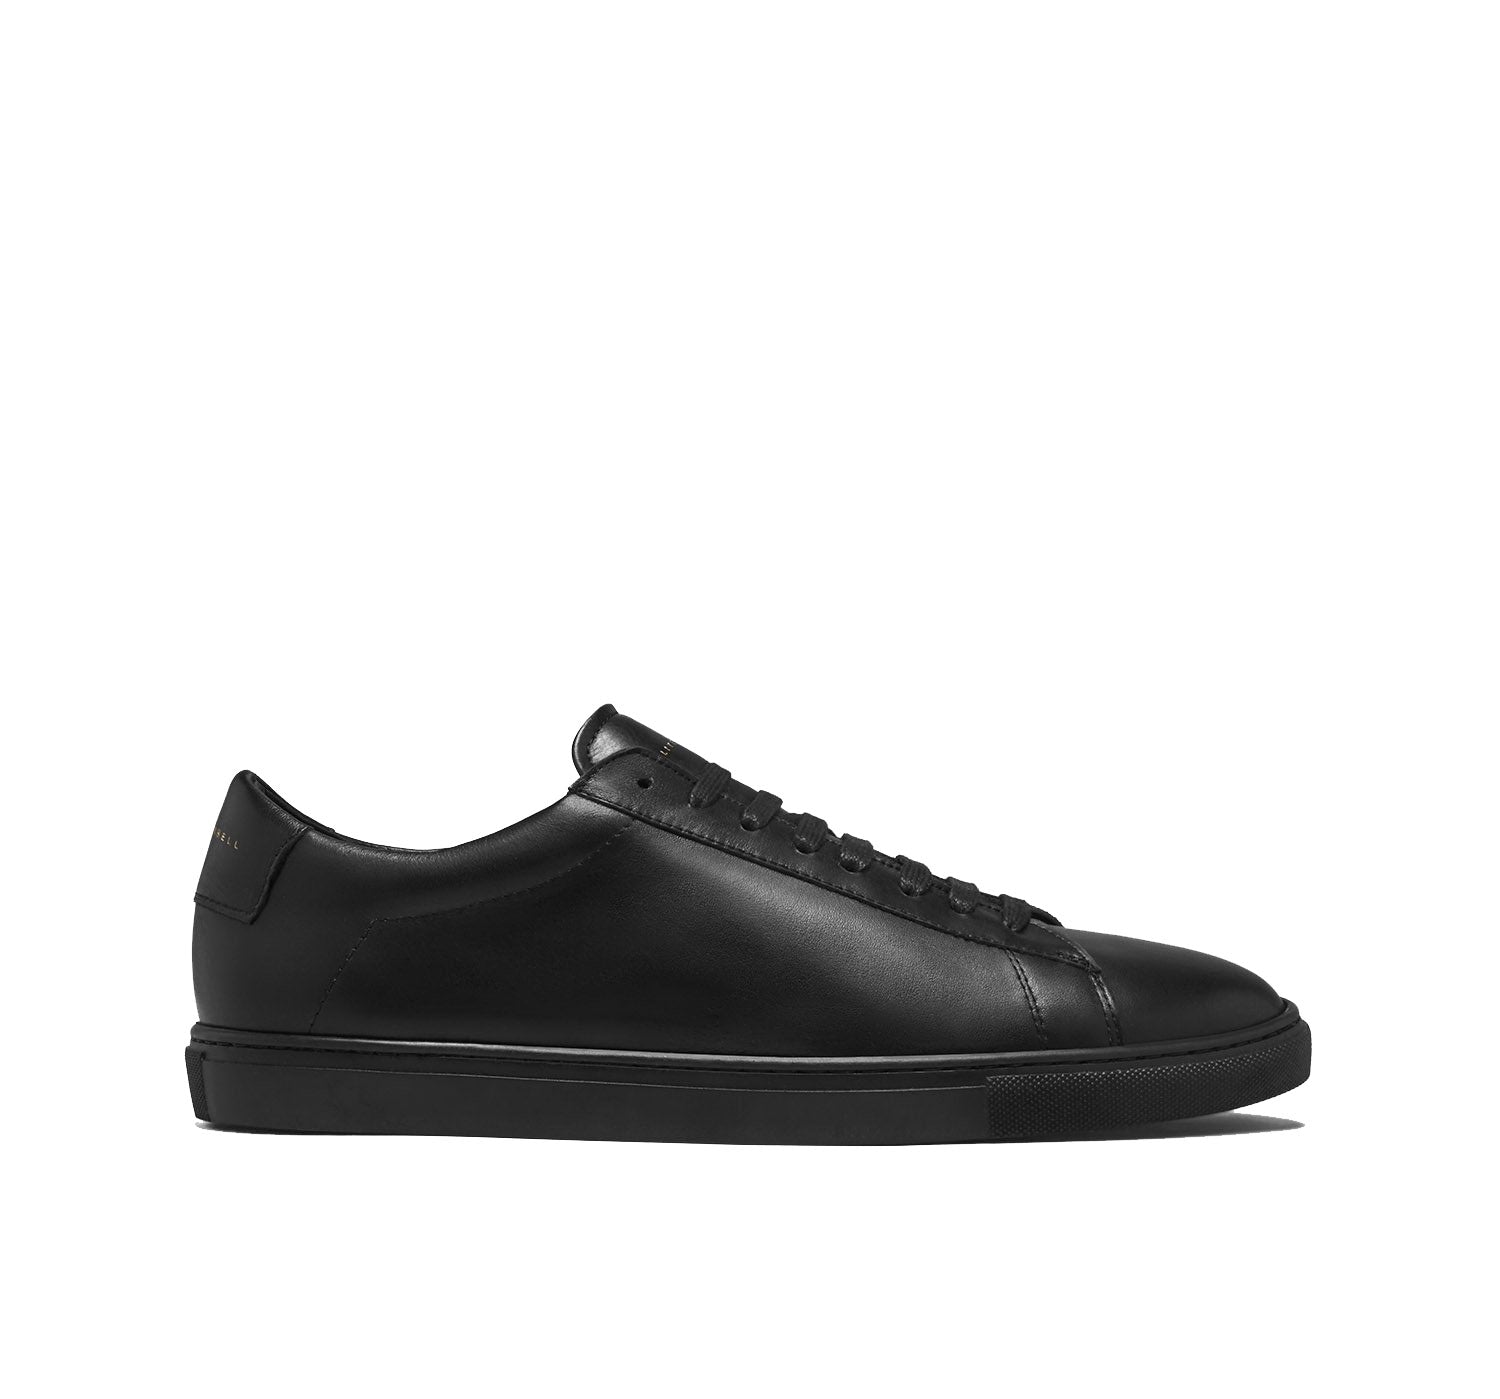 Black Leather Low Top Lace Up Sneaker for Men. Black Comfortable Cup Sole.